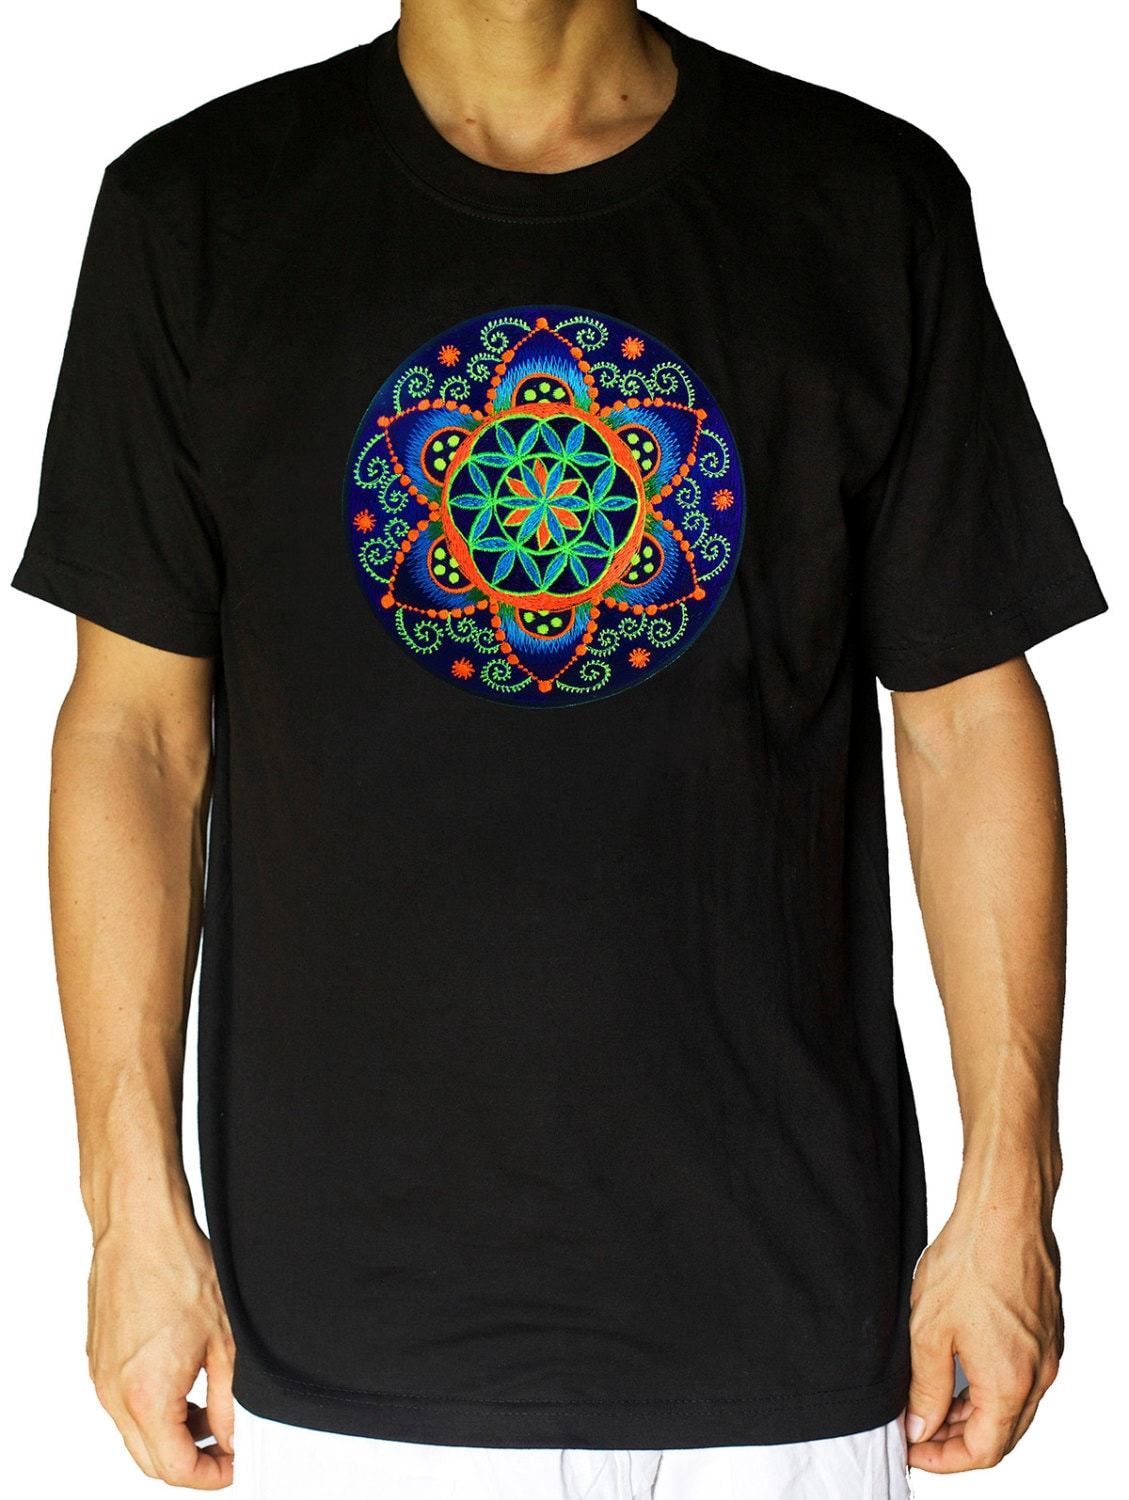 fractal Seed of Life shirt crop circle - sacred geometry flower of life drunvalo melchizedek handmade - choose any colour and size